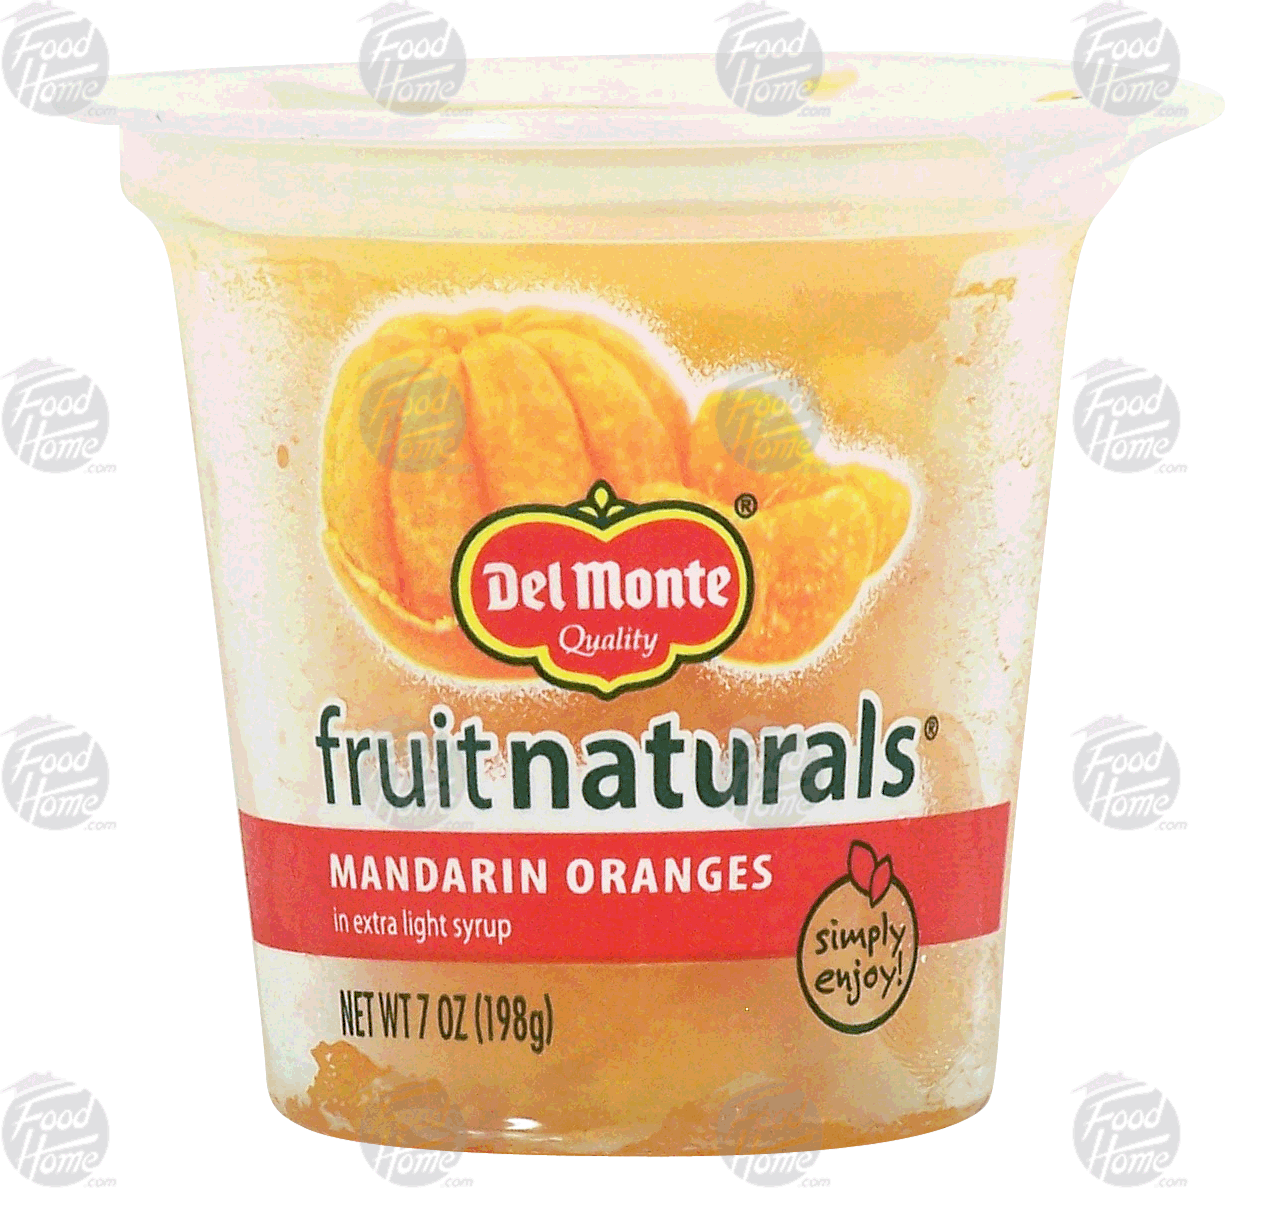 Del Monte fruit naturals mandarin oranges in extra light syrup Full-Size Picture